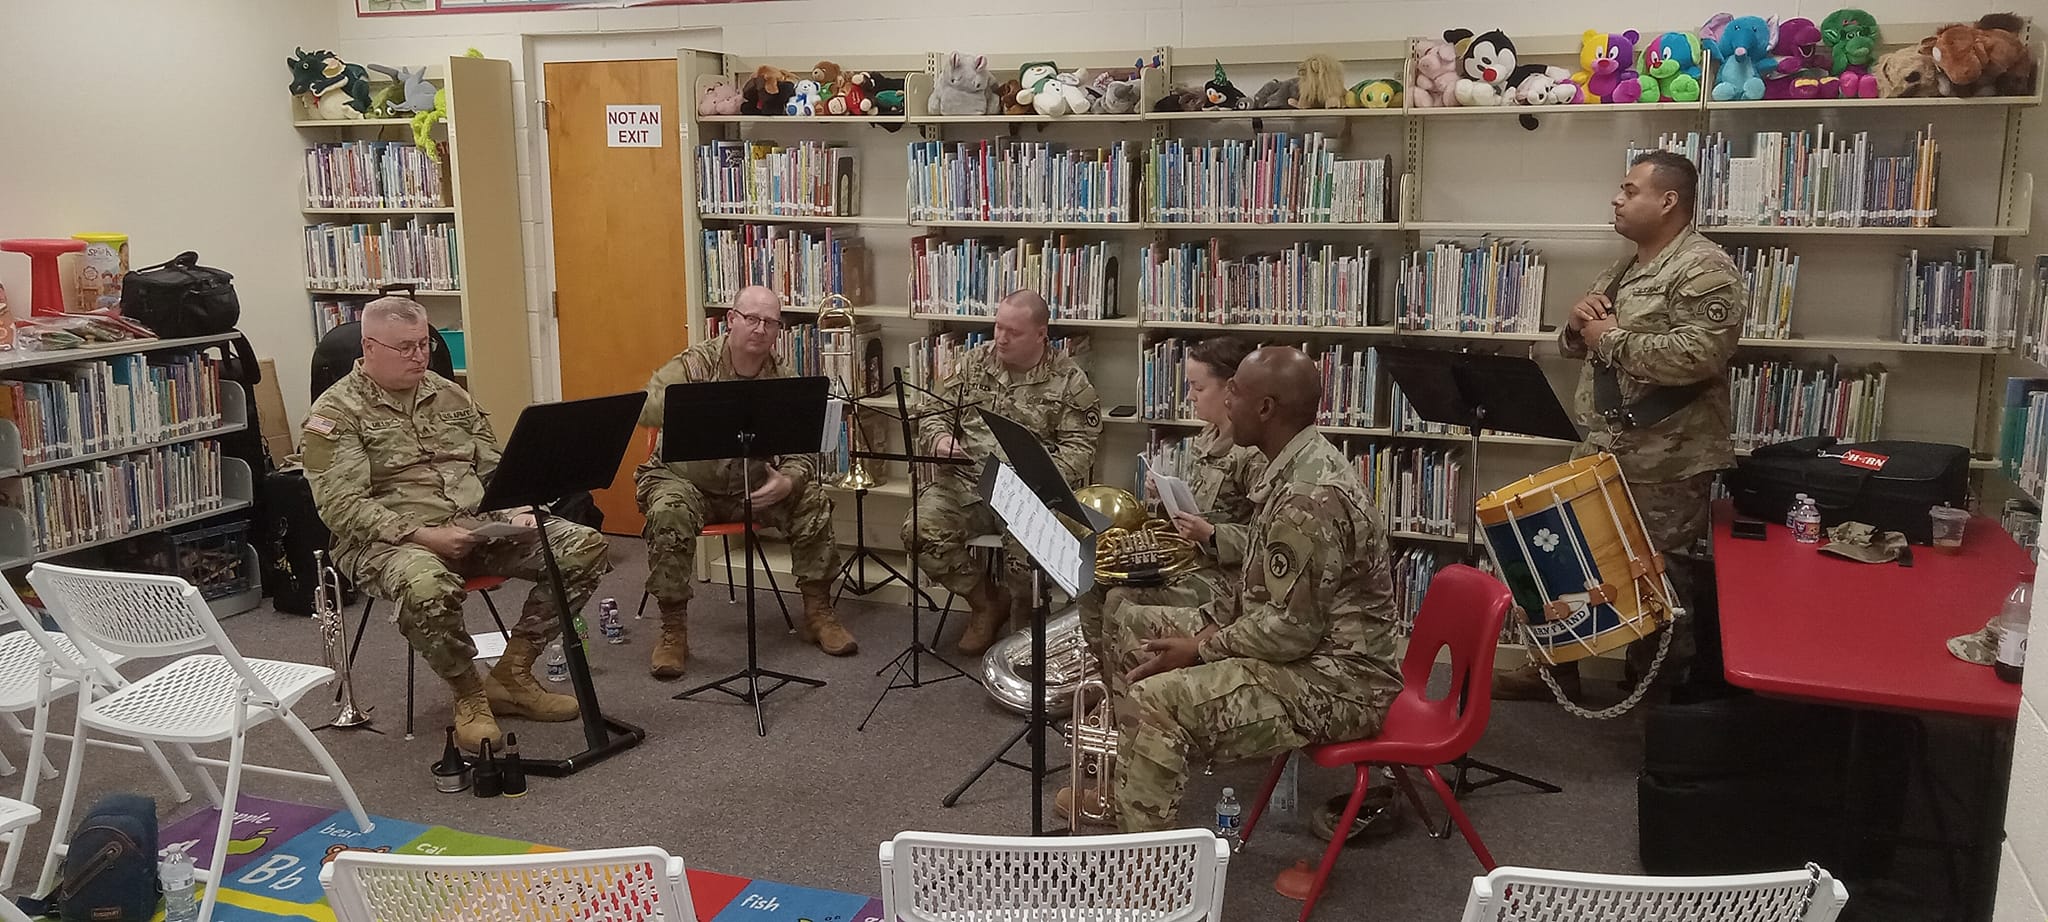 The 208th Army Band jazz quintet seated and playing their instruments in front of library shelves.